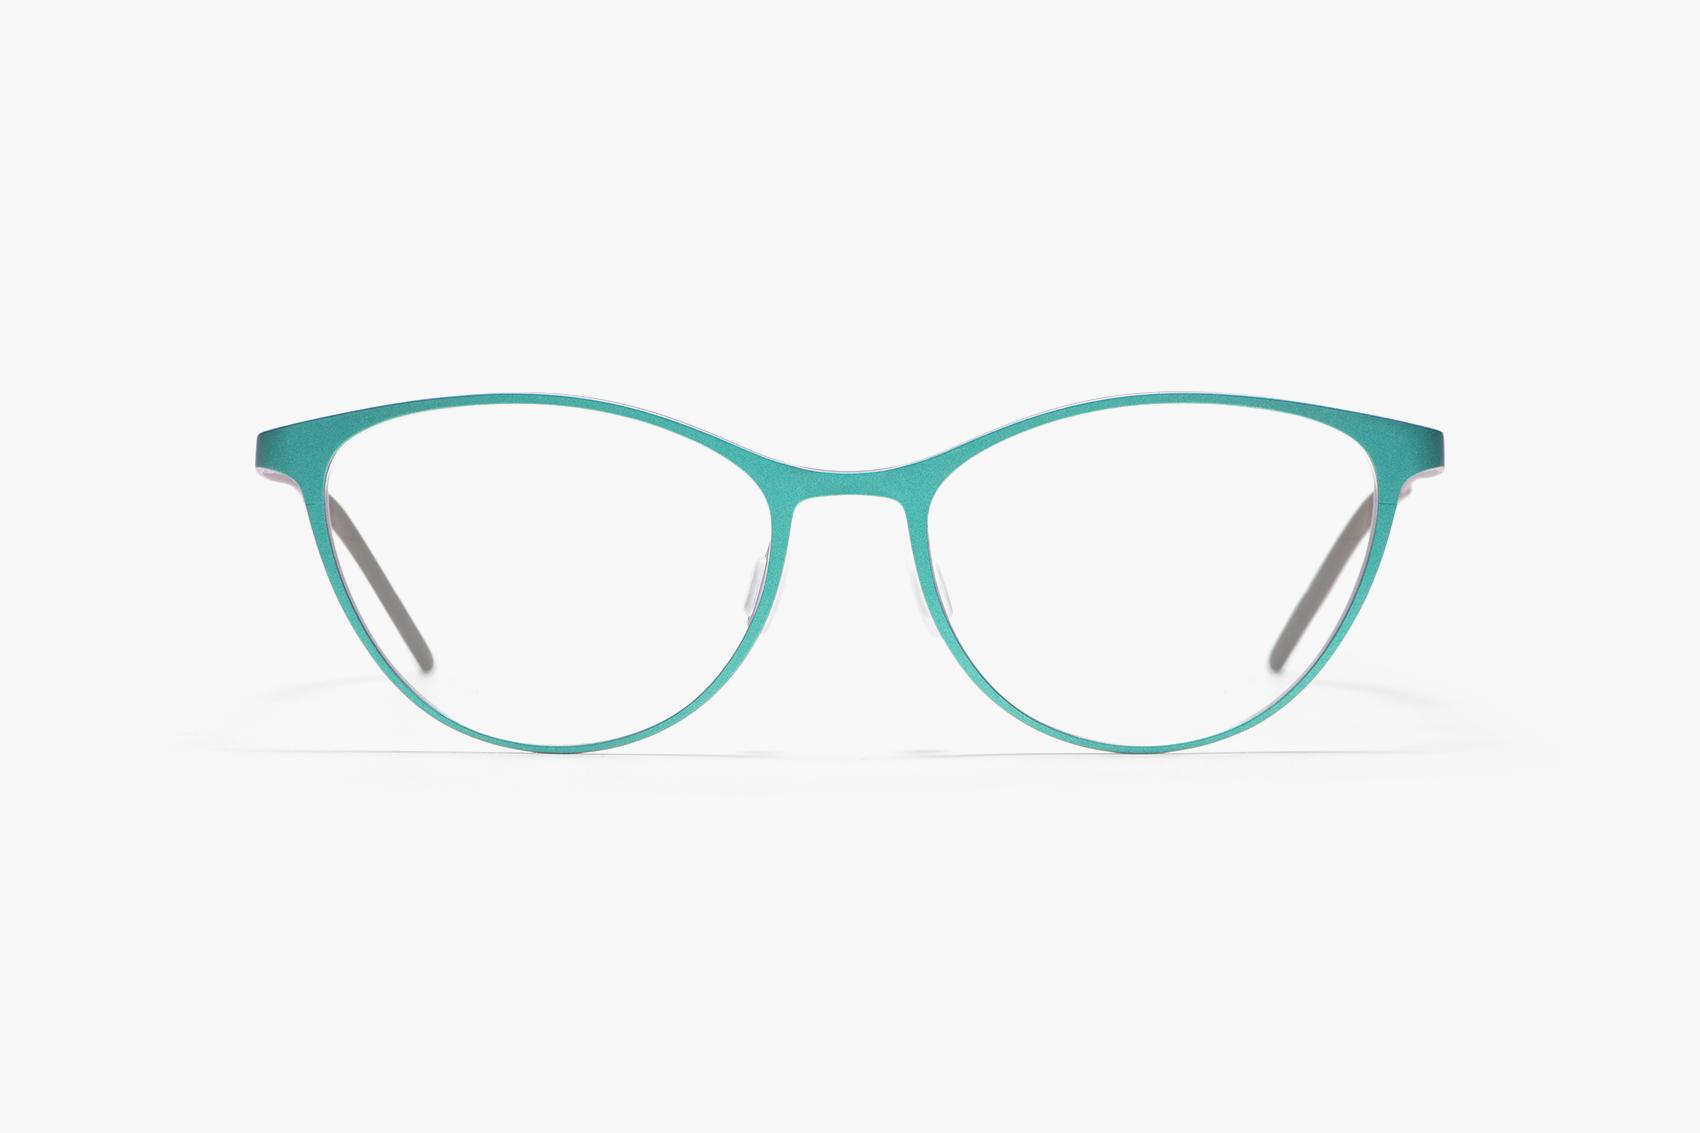 ØRGREEN | Try top glasses find an optician | FAVR